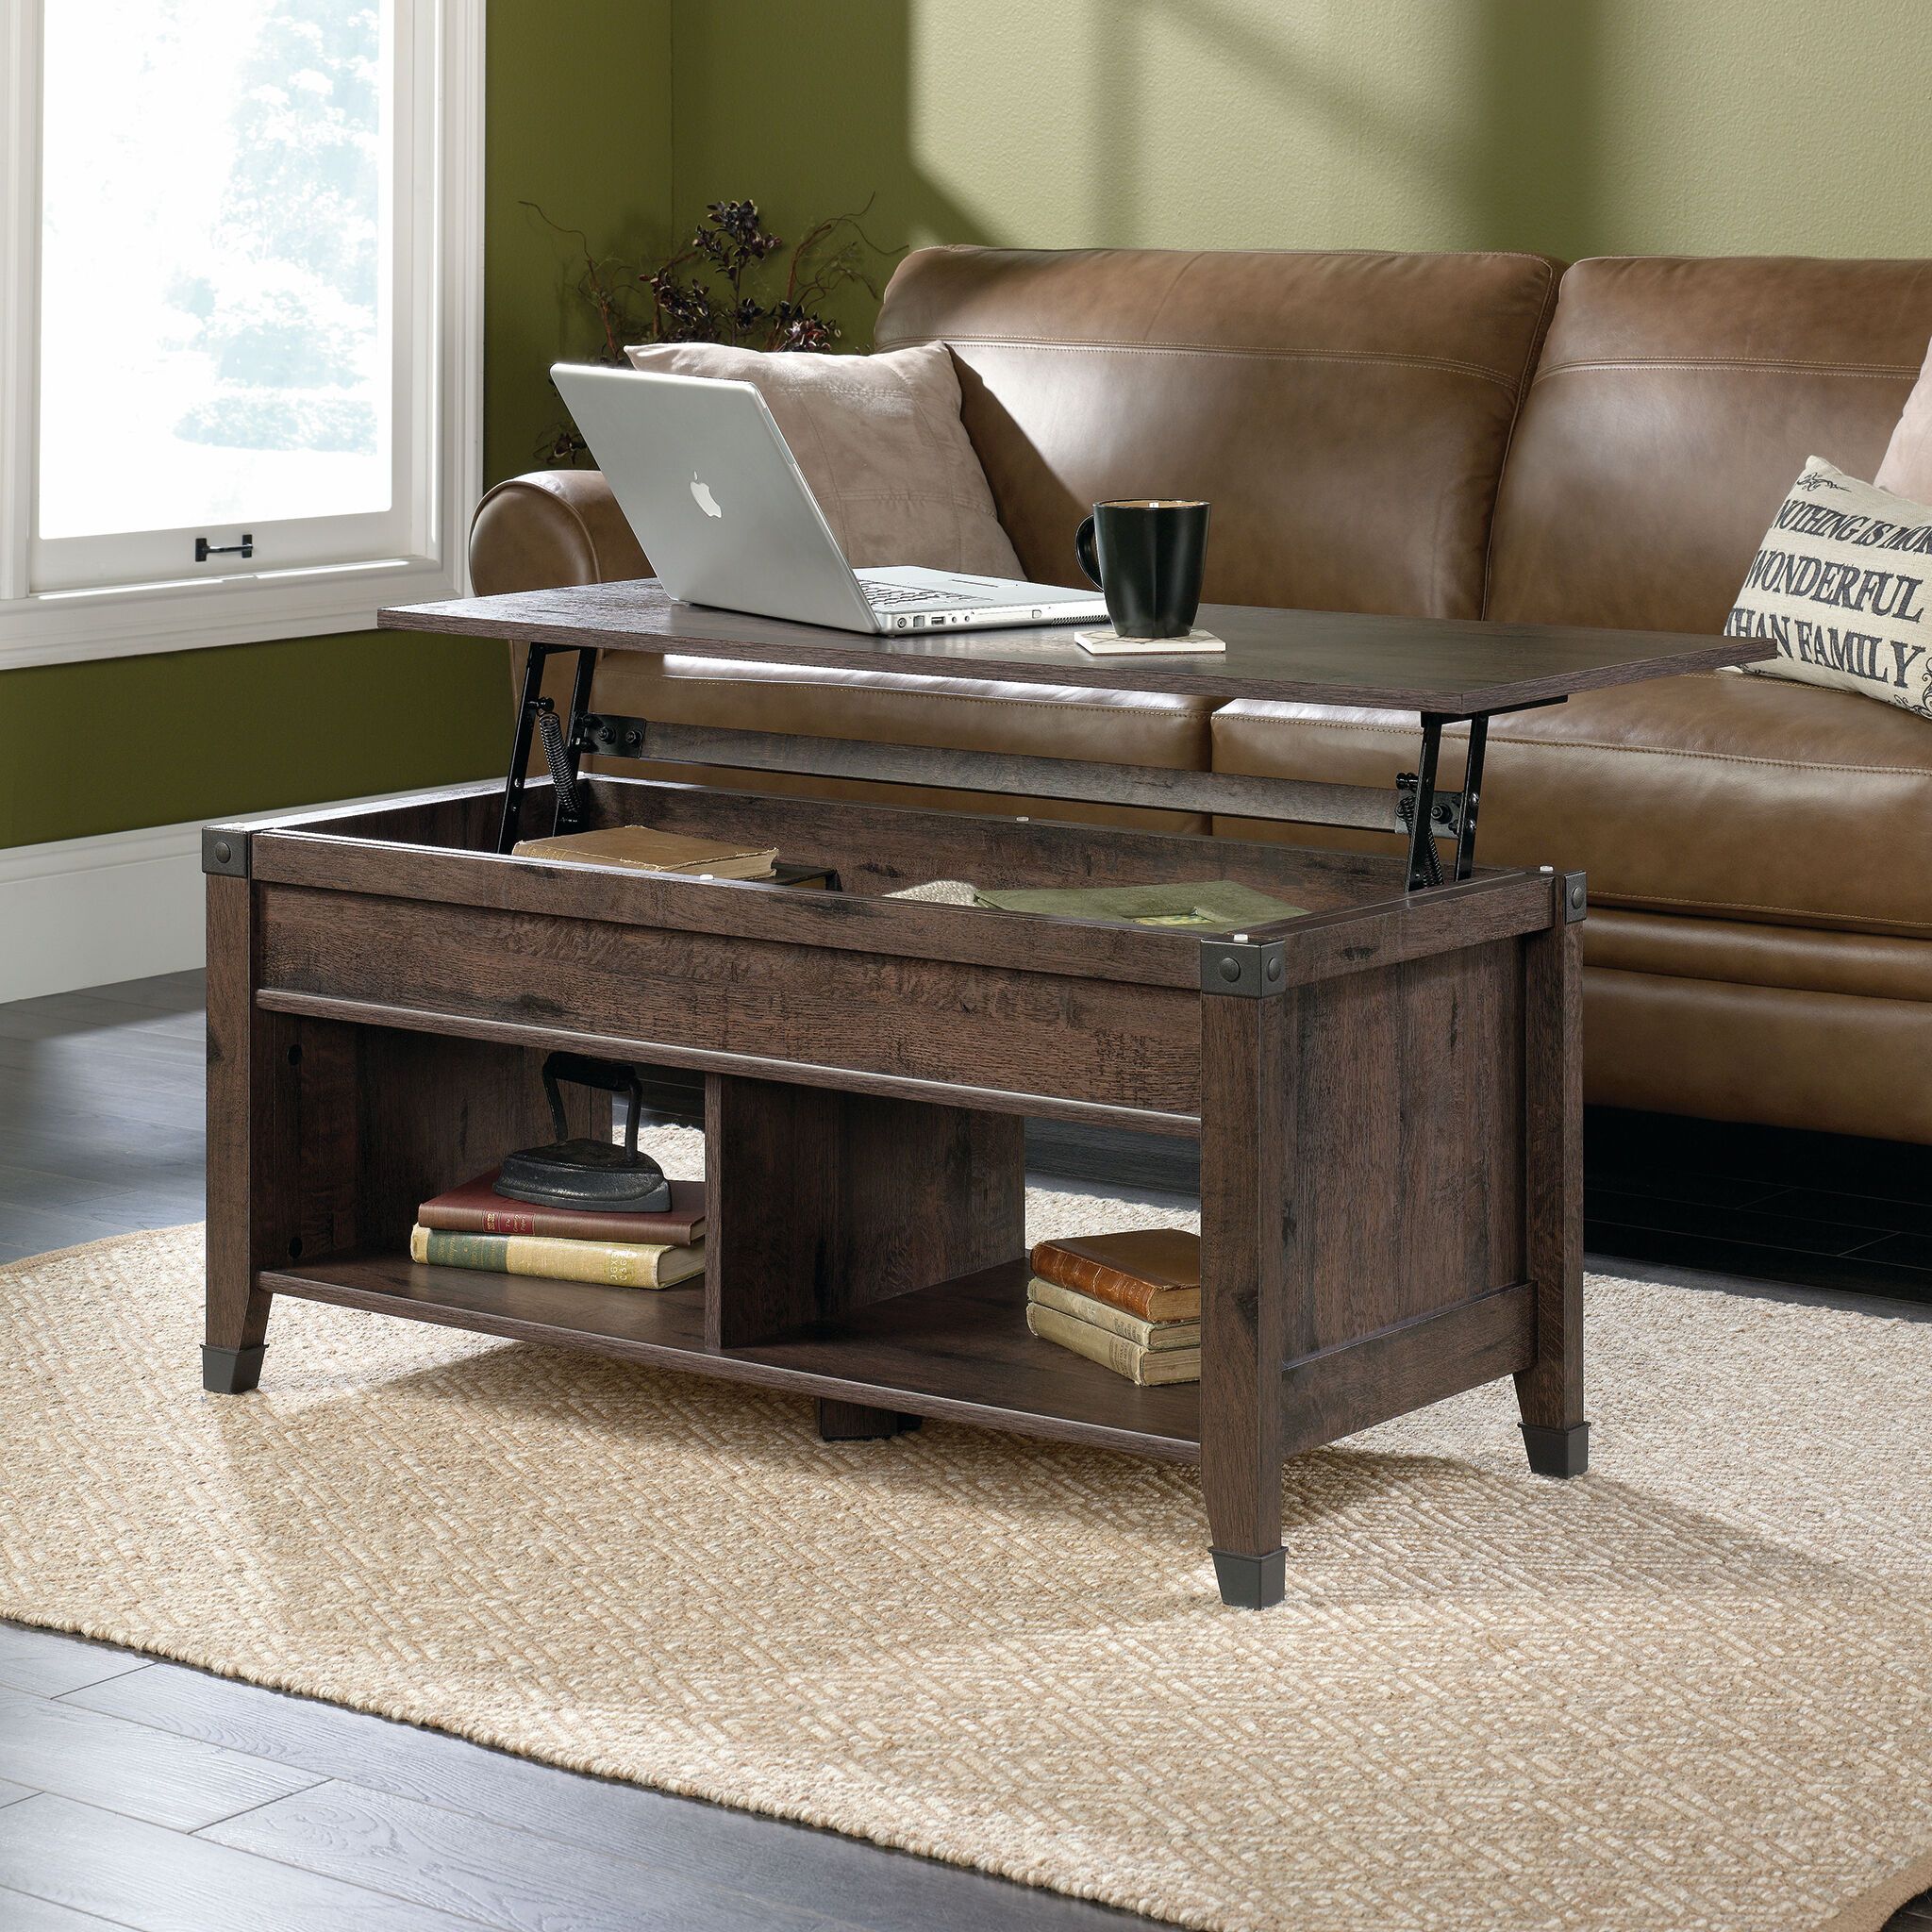 Rectangular Lift Top Contemporary Coffee Table In Coffee Oak | Mathis Pertaining To Modern Wooden Lift Top Tables (Gallery 4 of 20)